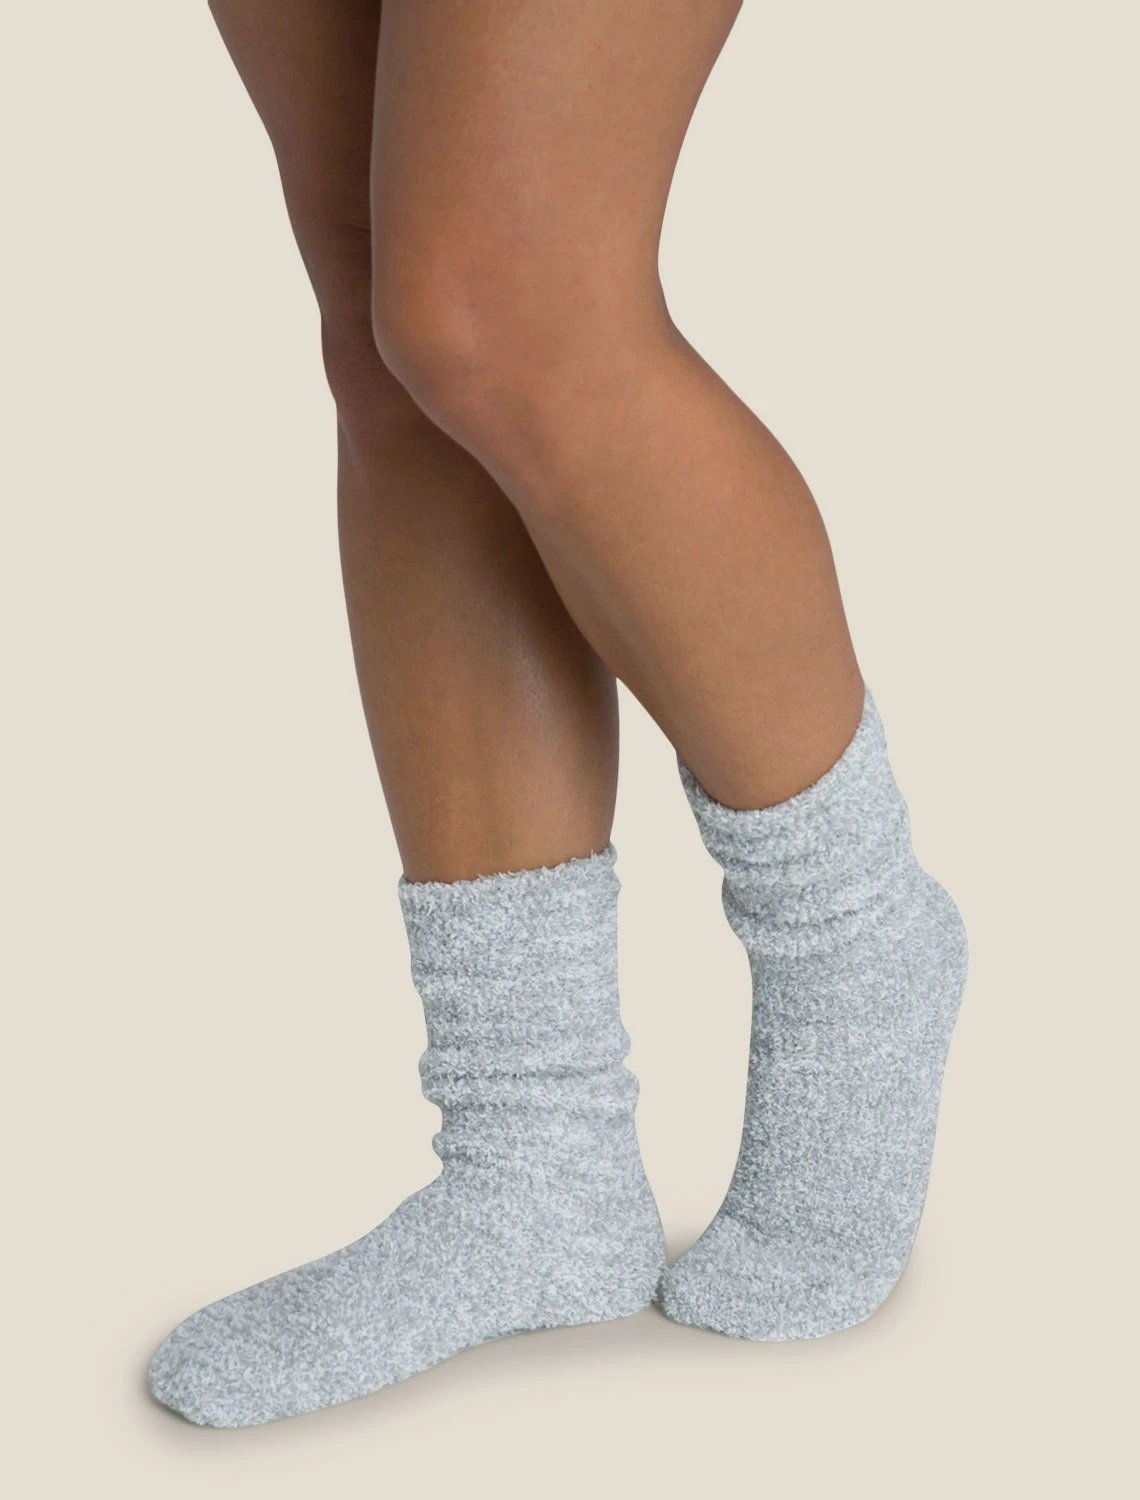 Cozychic® Women's Heathered Socks - Molly's! A Chic and Unique Boutique 